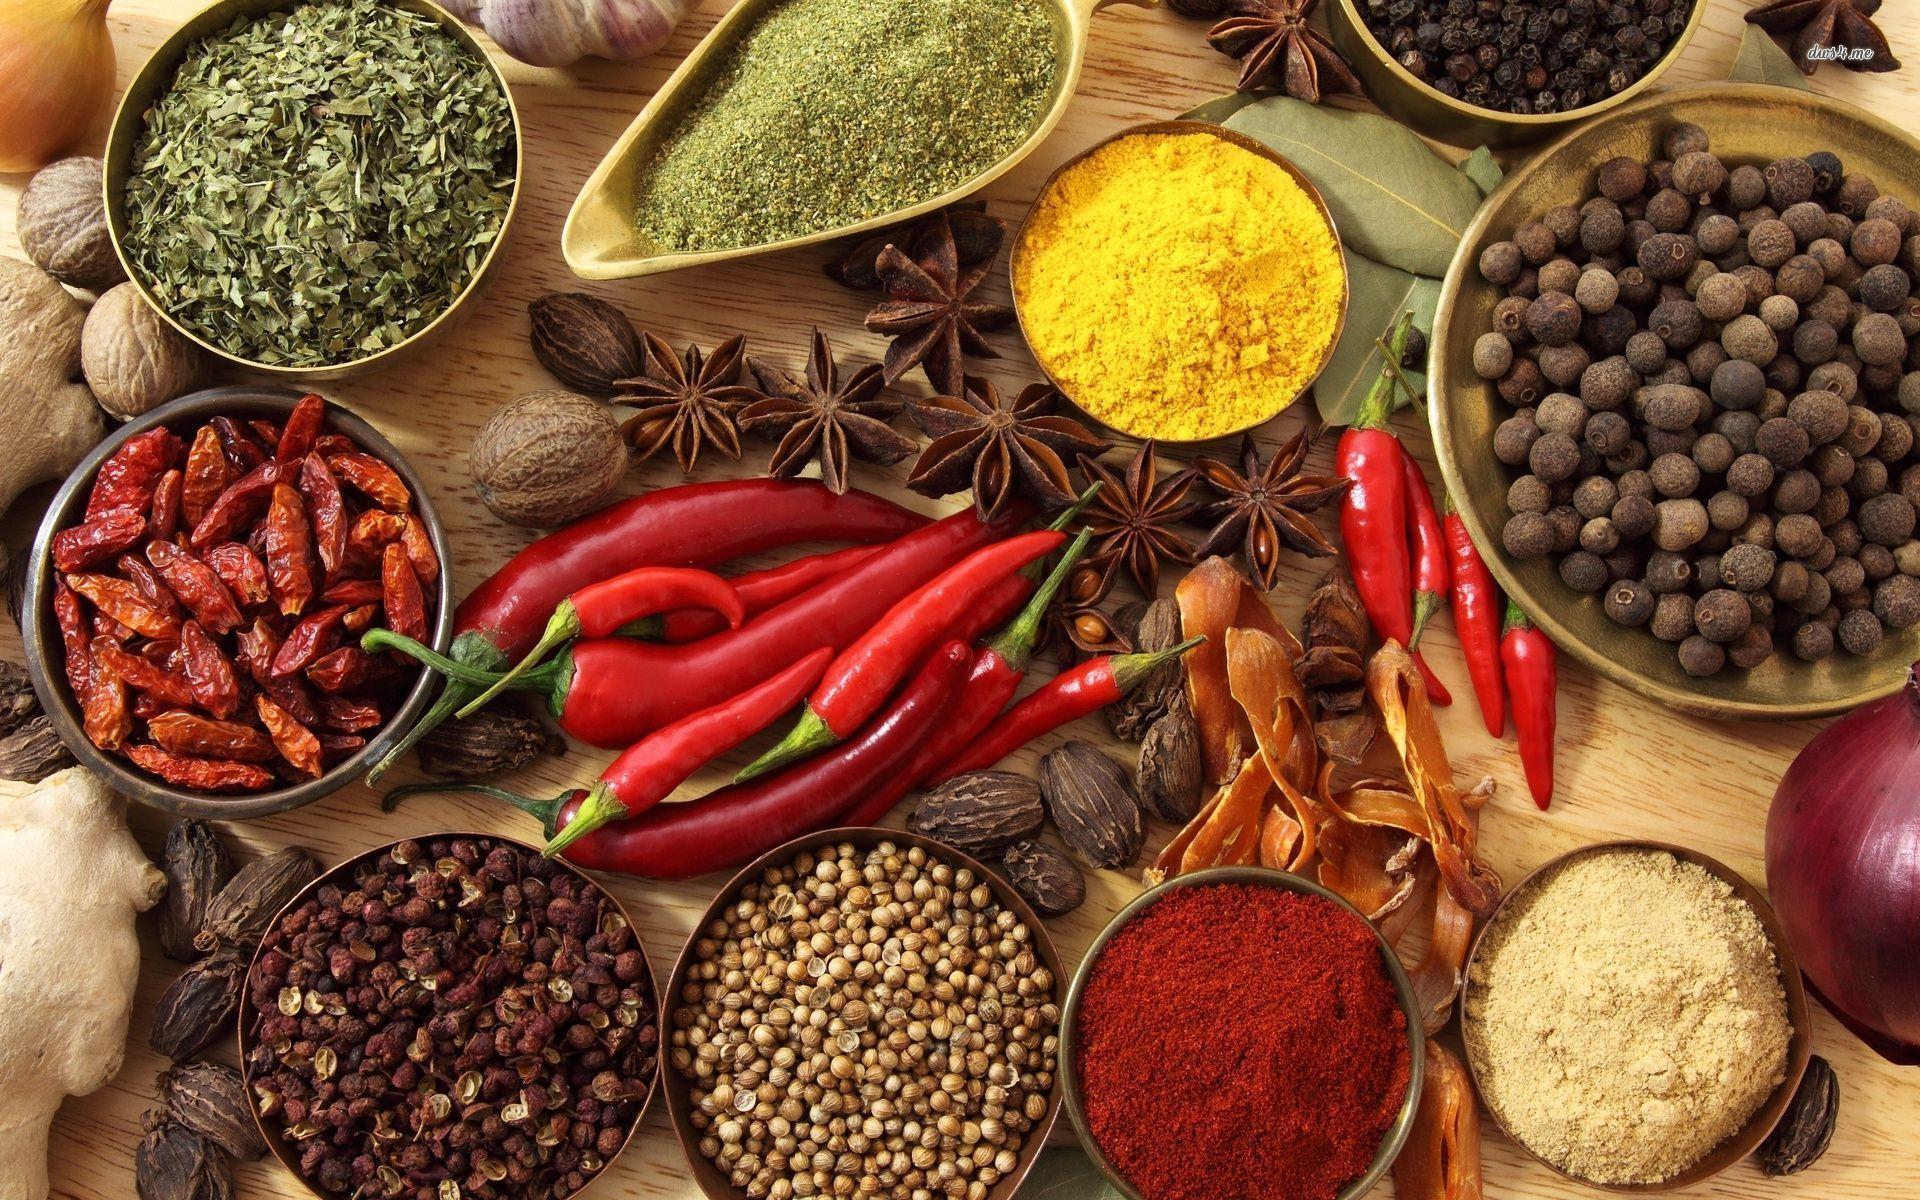 Top Image: Spice Wallpaper, Amazing Spice Image Collection